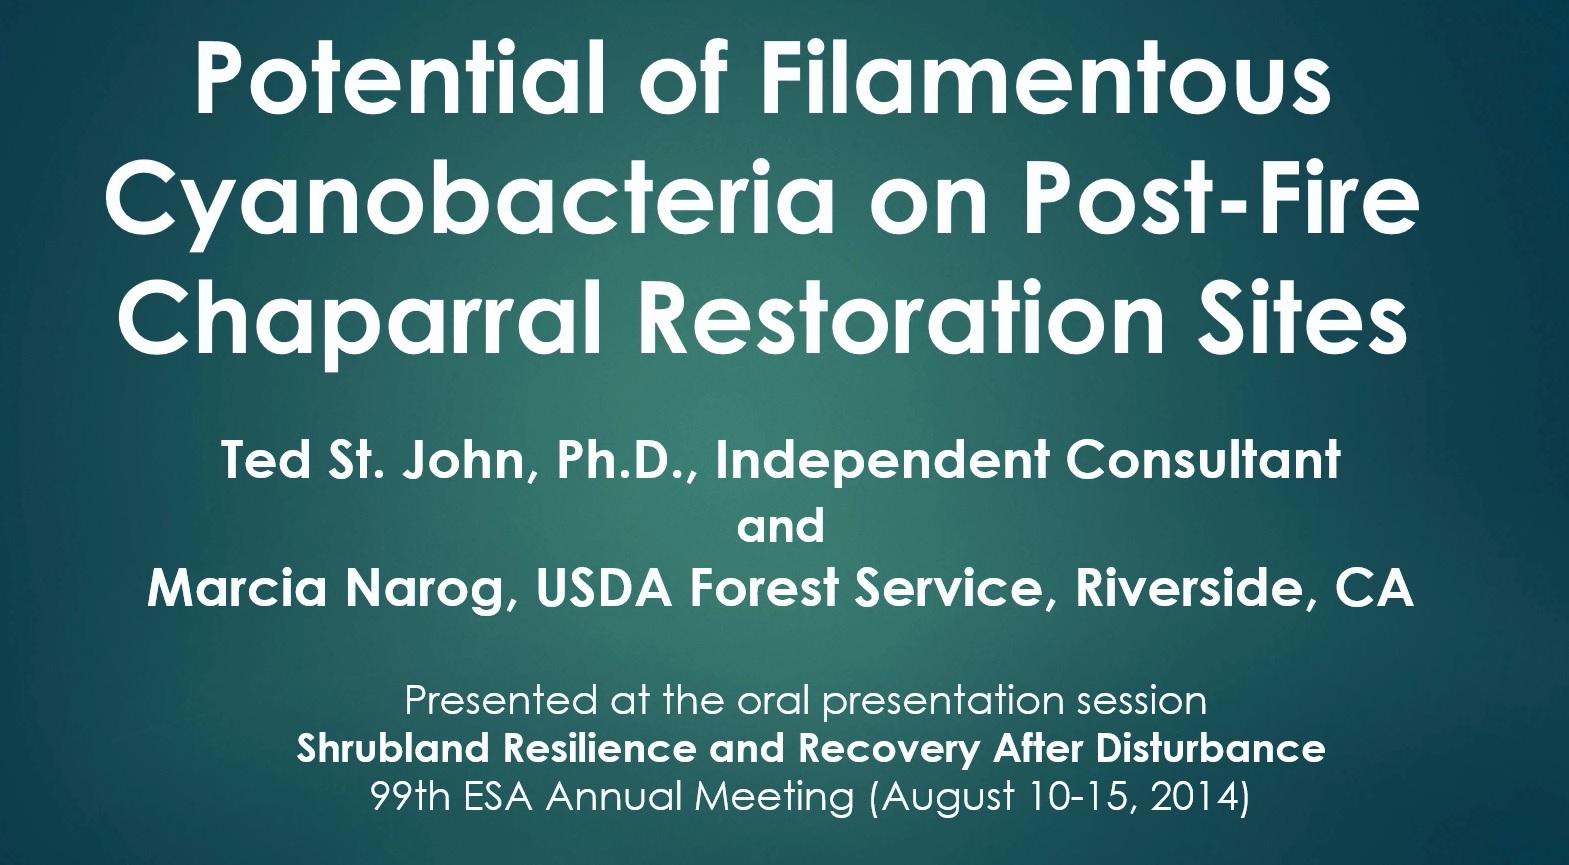 Preview image for presentation titled, Potential of Filamentous Cyanobacteria on Post-Fire Chaparral Restoration Sites